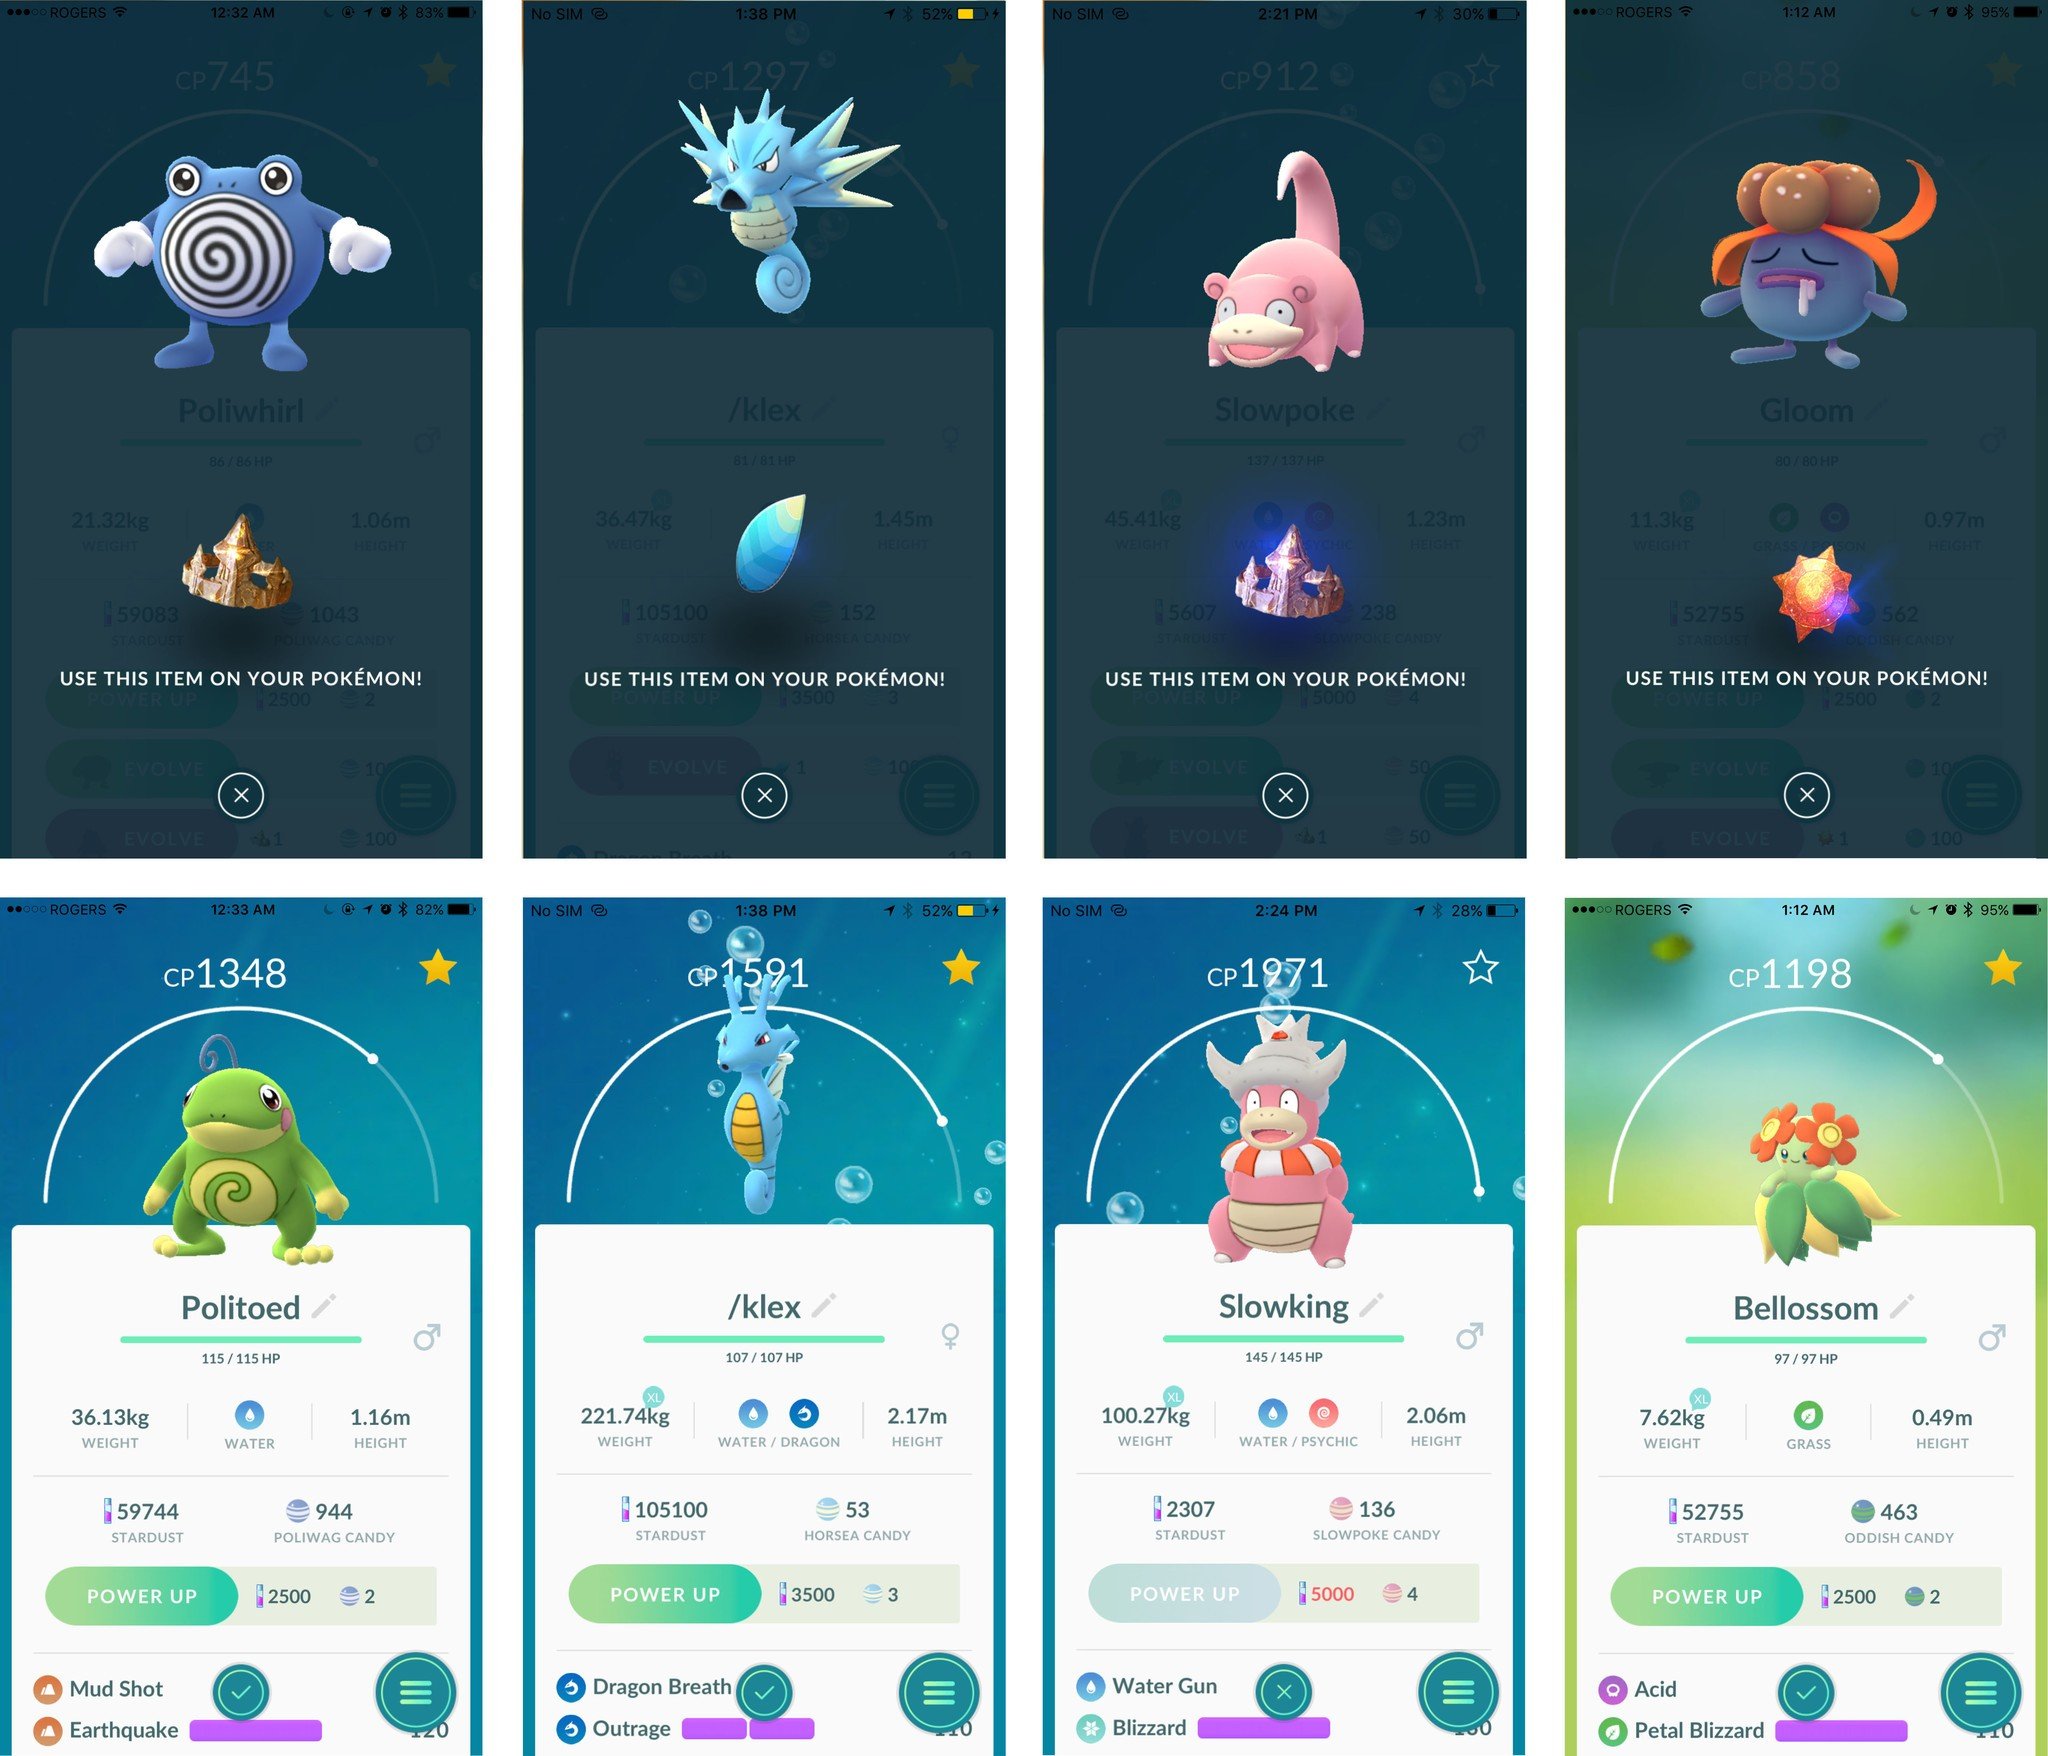 How to evolve Gen 2 in Pokémon Go: Candy, Items, and friendship! | iMore